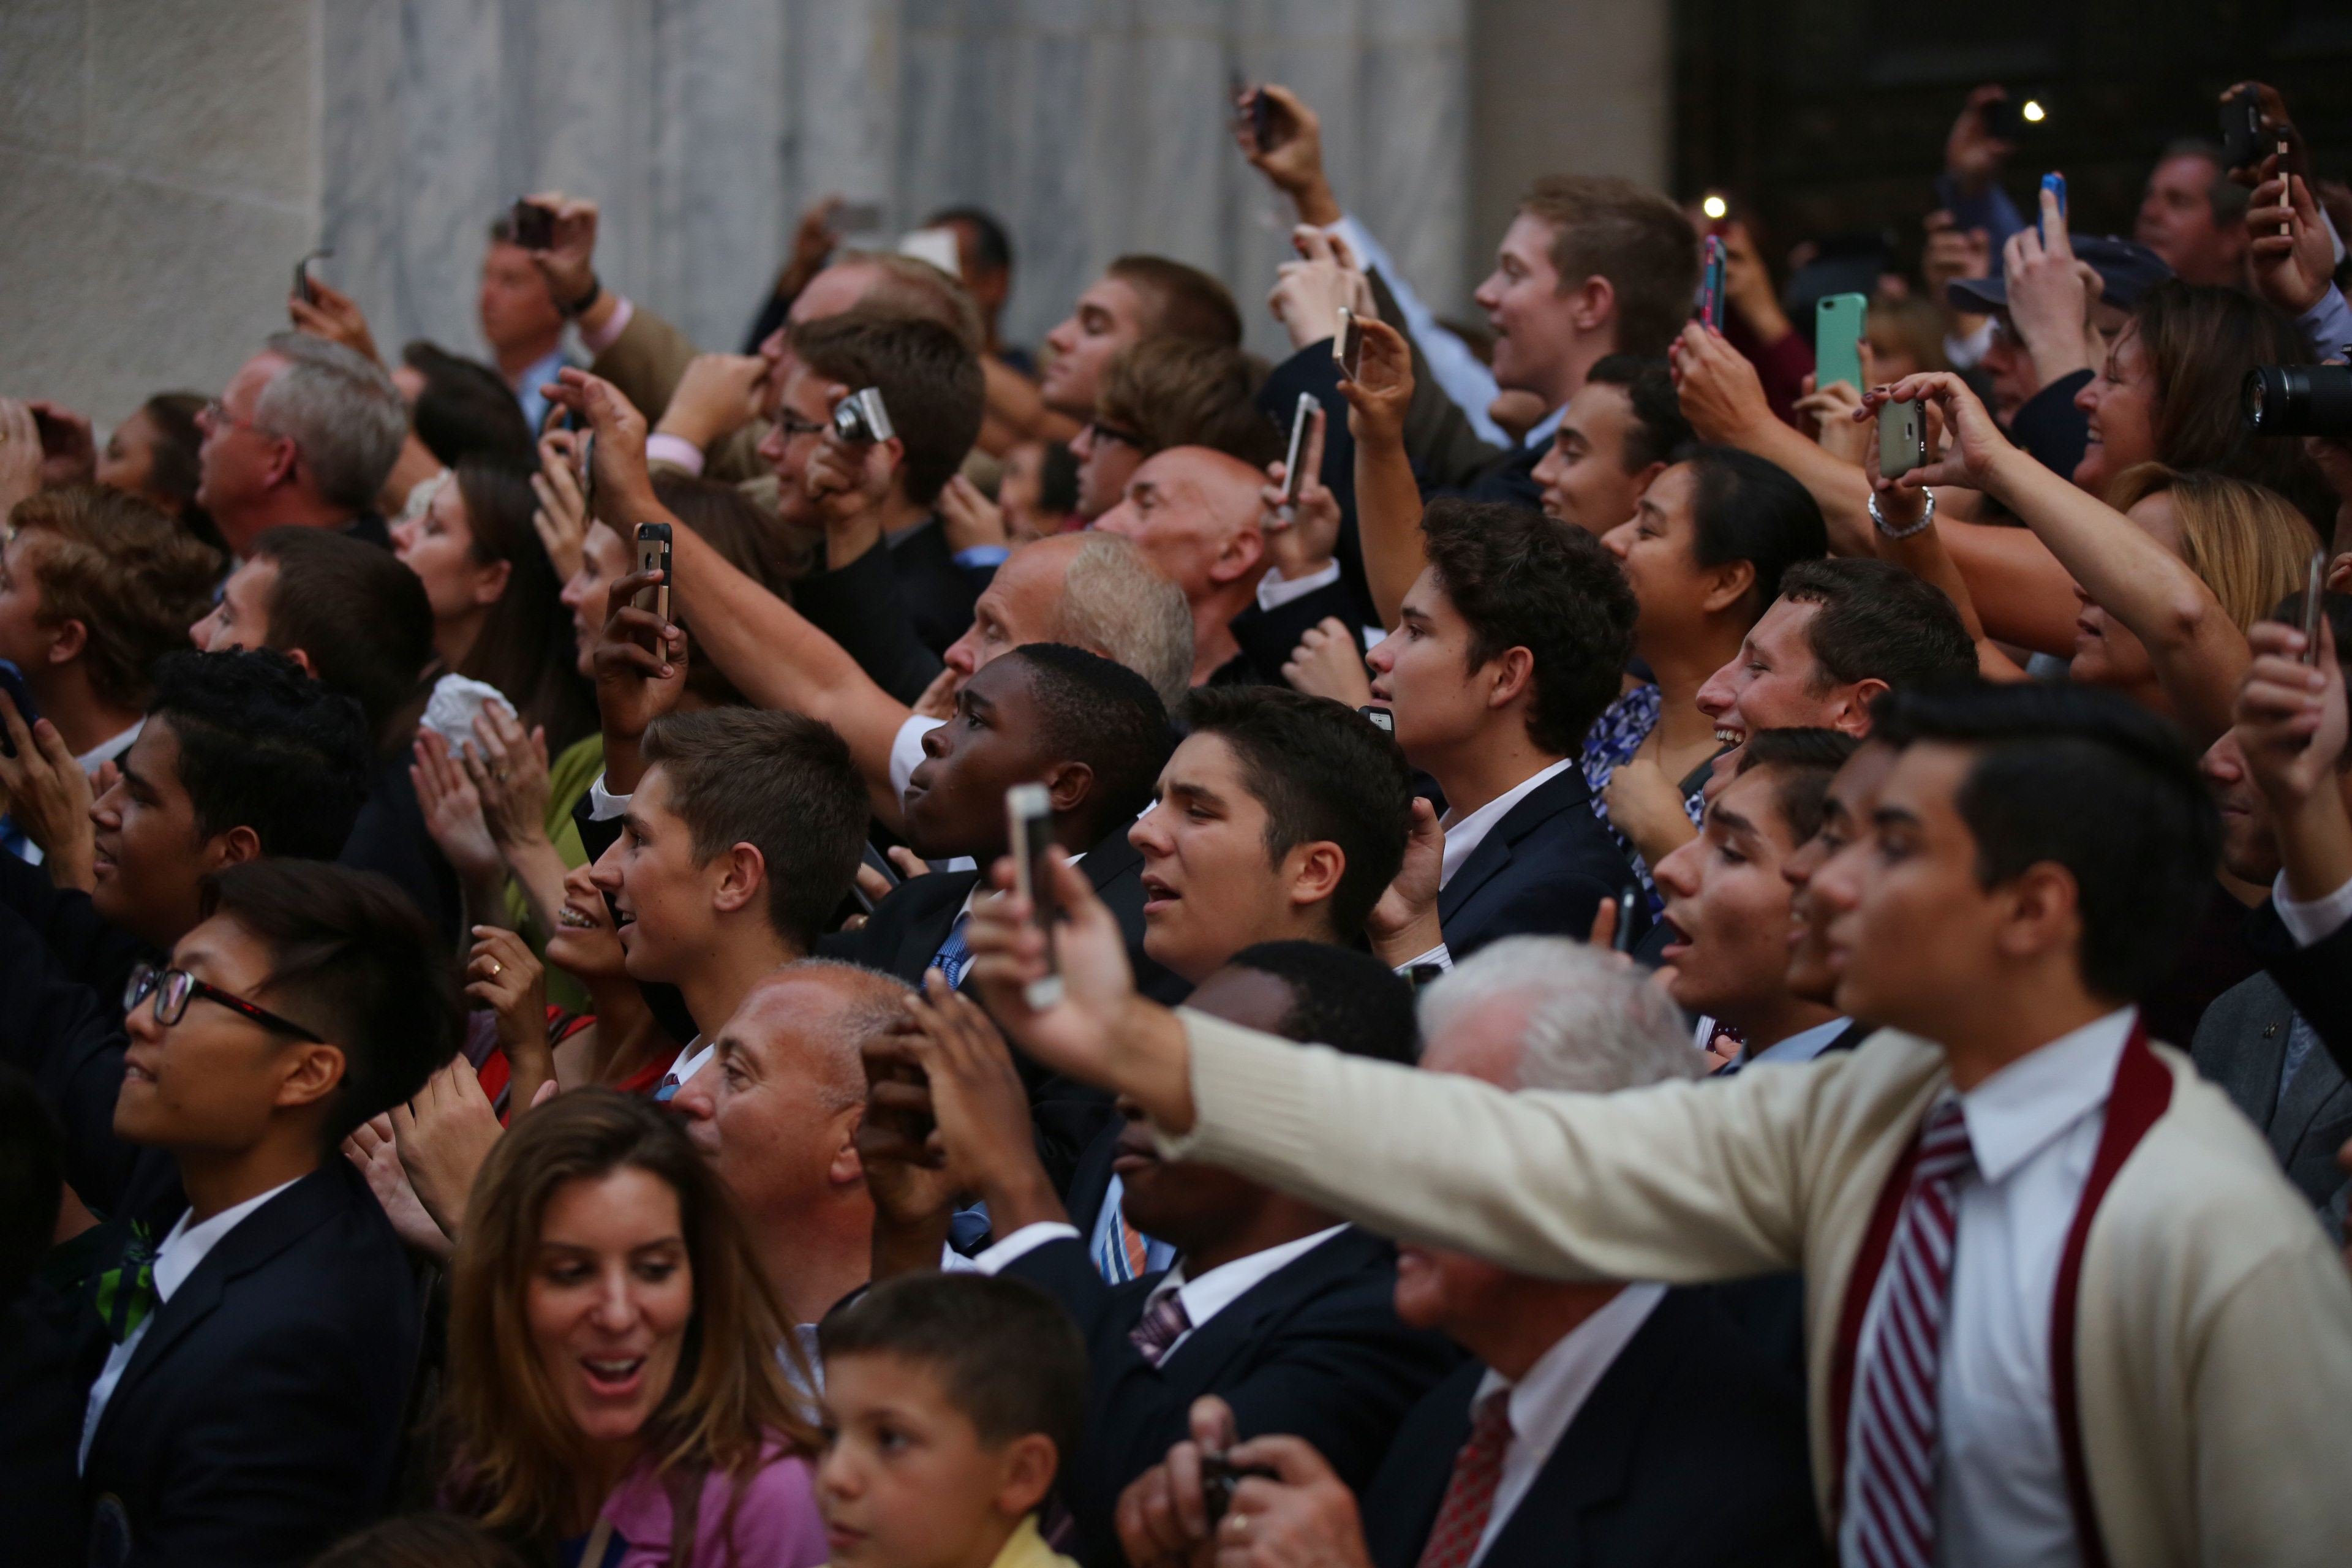 People in the crowds outside of St. Patrick's Cathedral take pictures in New York City, on Sept. 24, 2015.